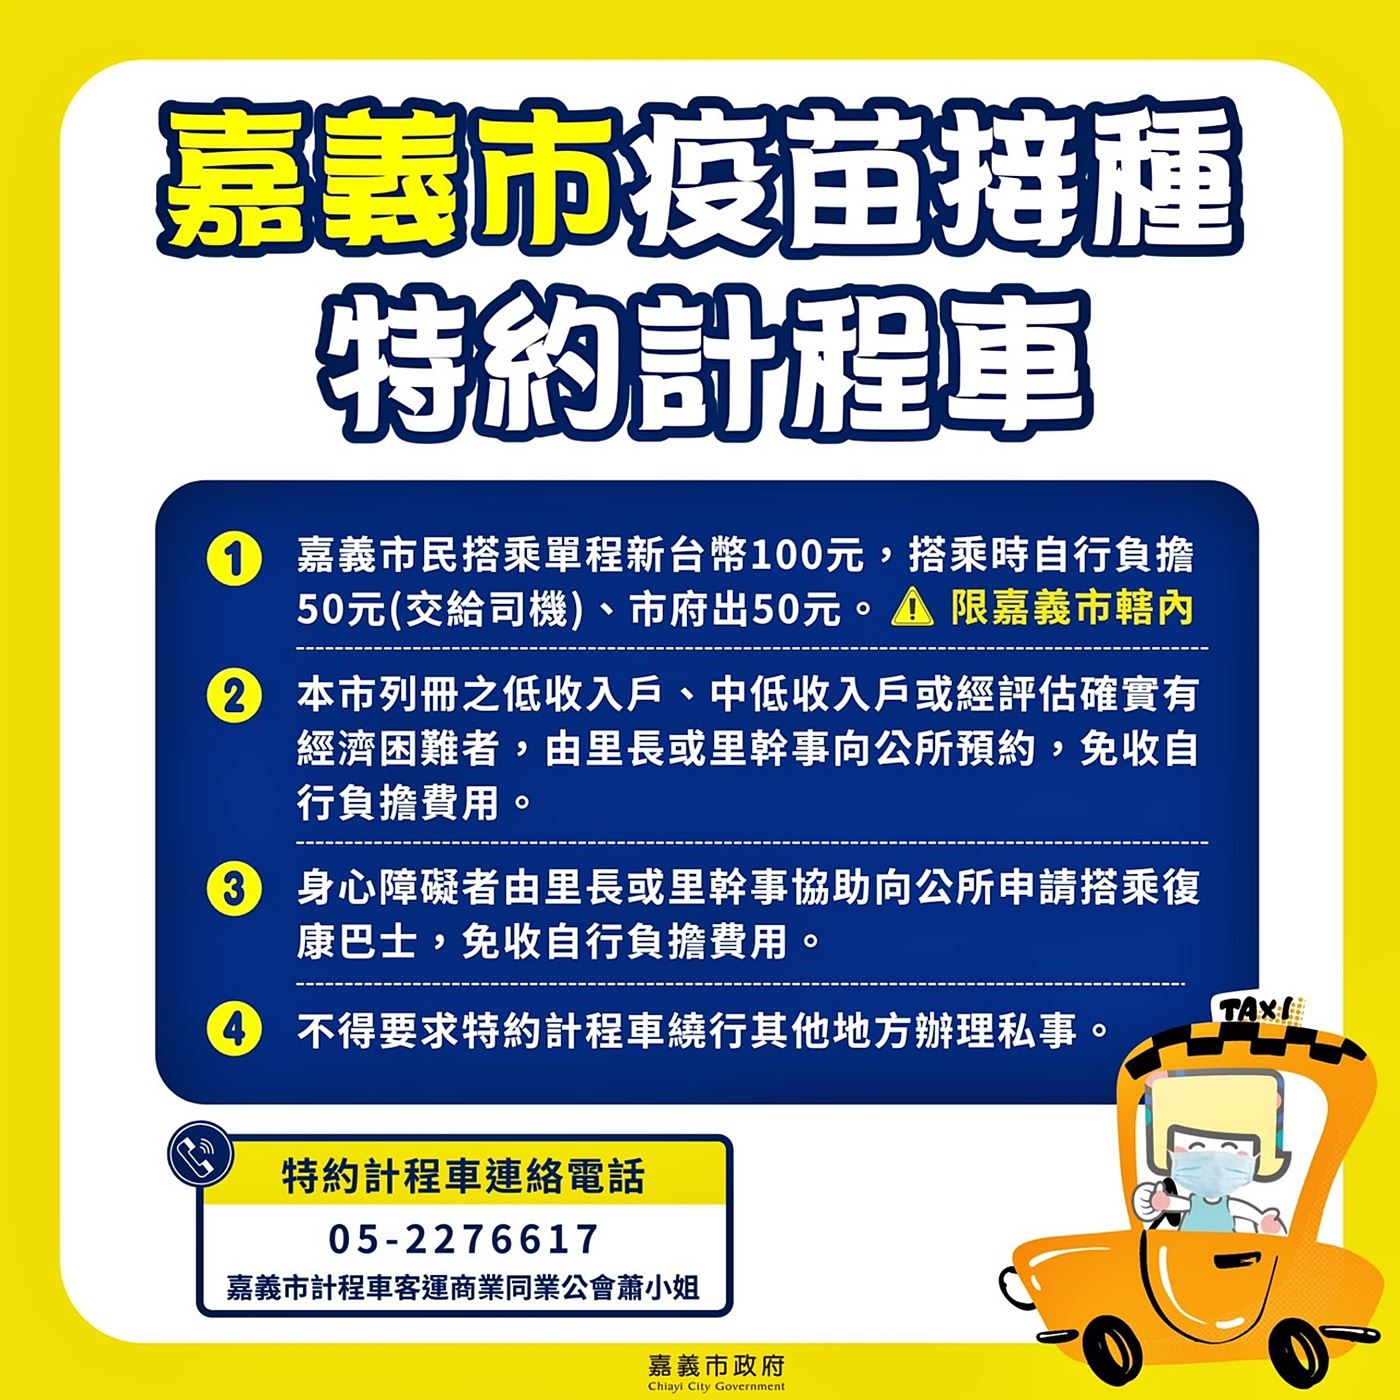 Each cab fare is NTD100. The local government will subsidize NTD50, so citizens only have to pay NTD50. (Photo / Provided by the Chiayi Government Department of Social Affairs)